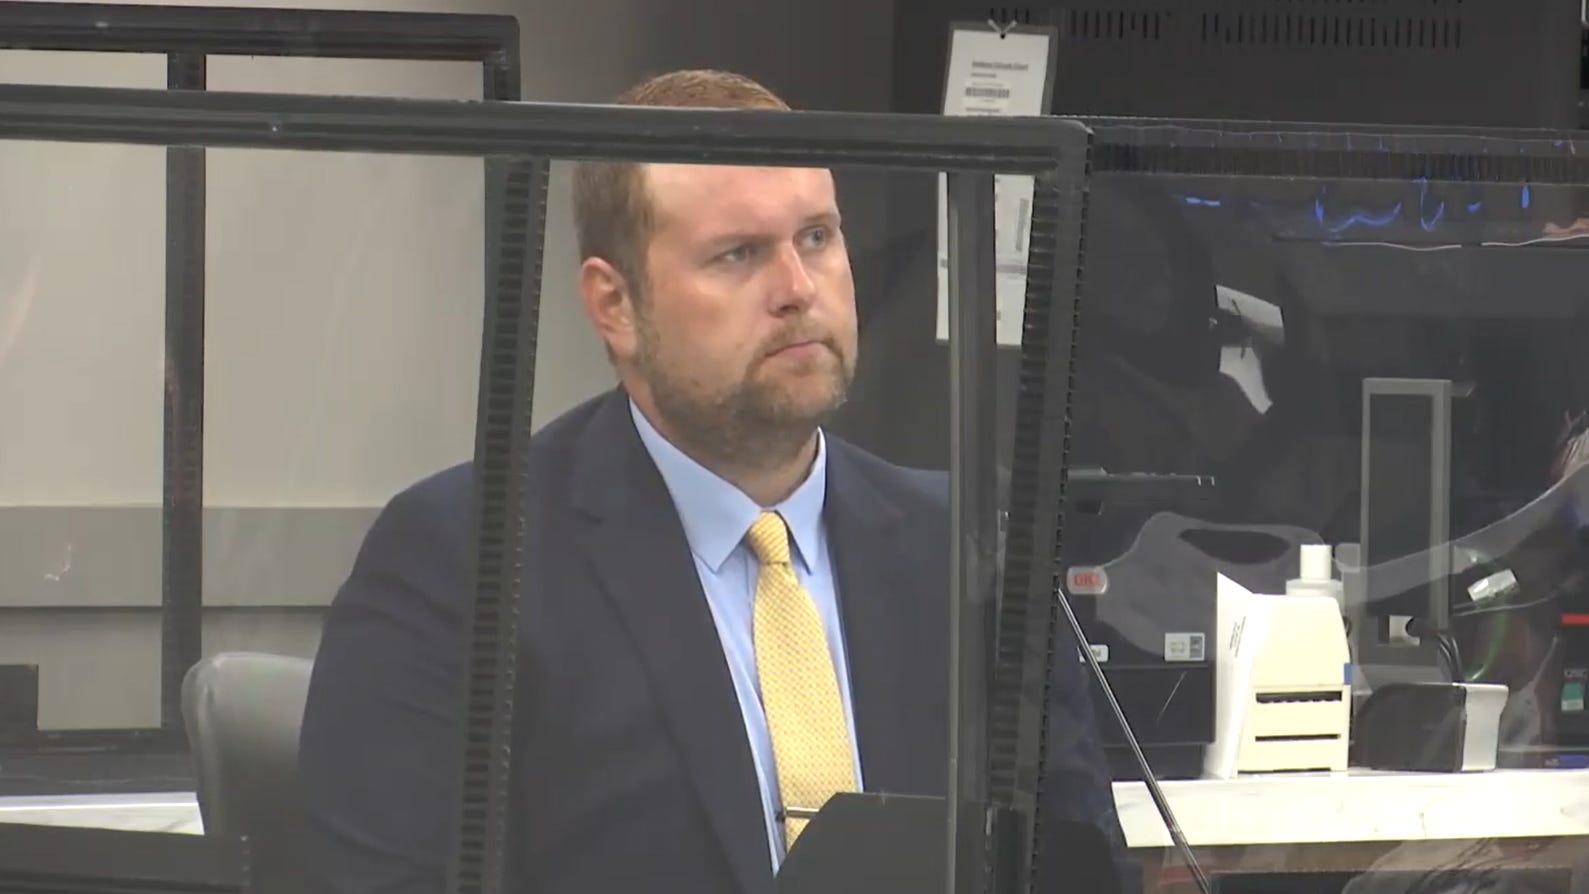 Zachary Wester drug planting trial Case in the hands of jury